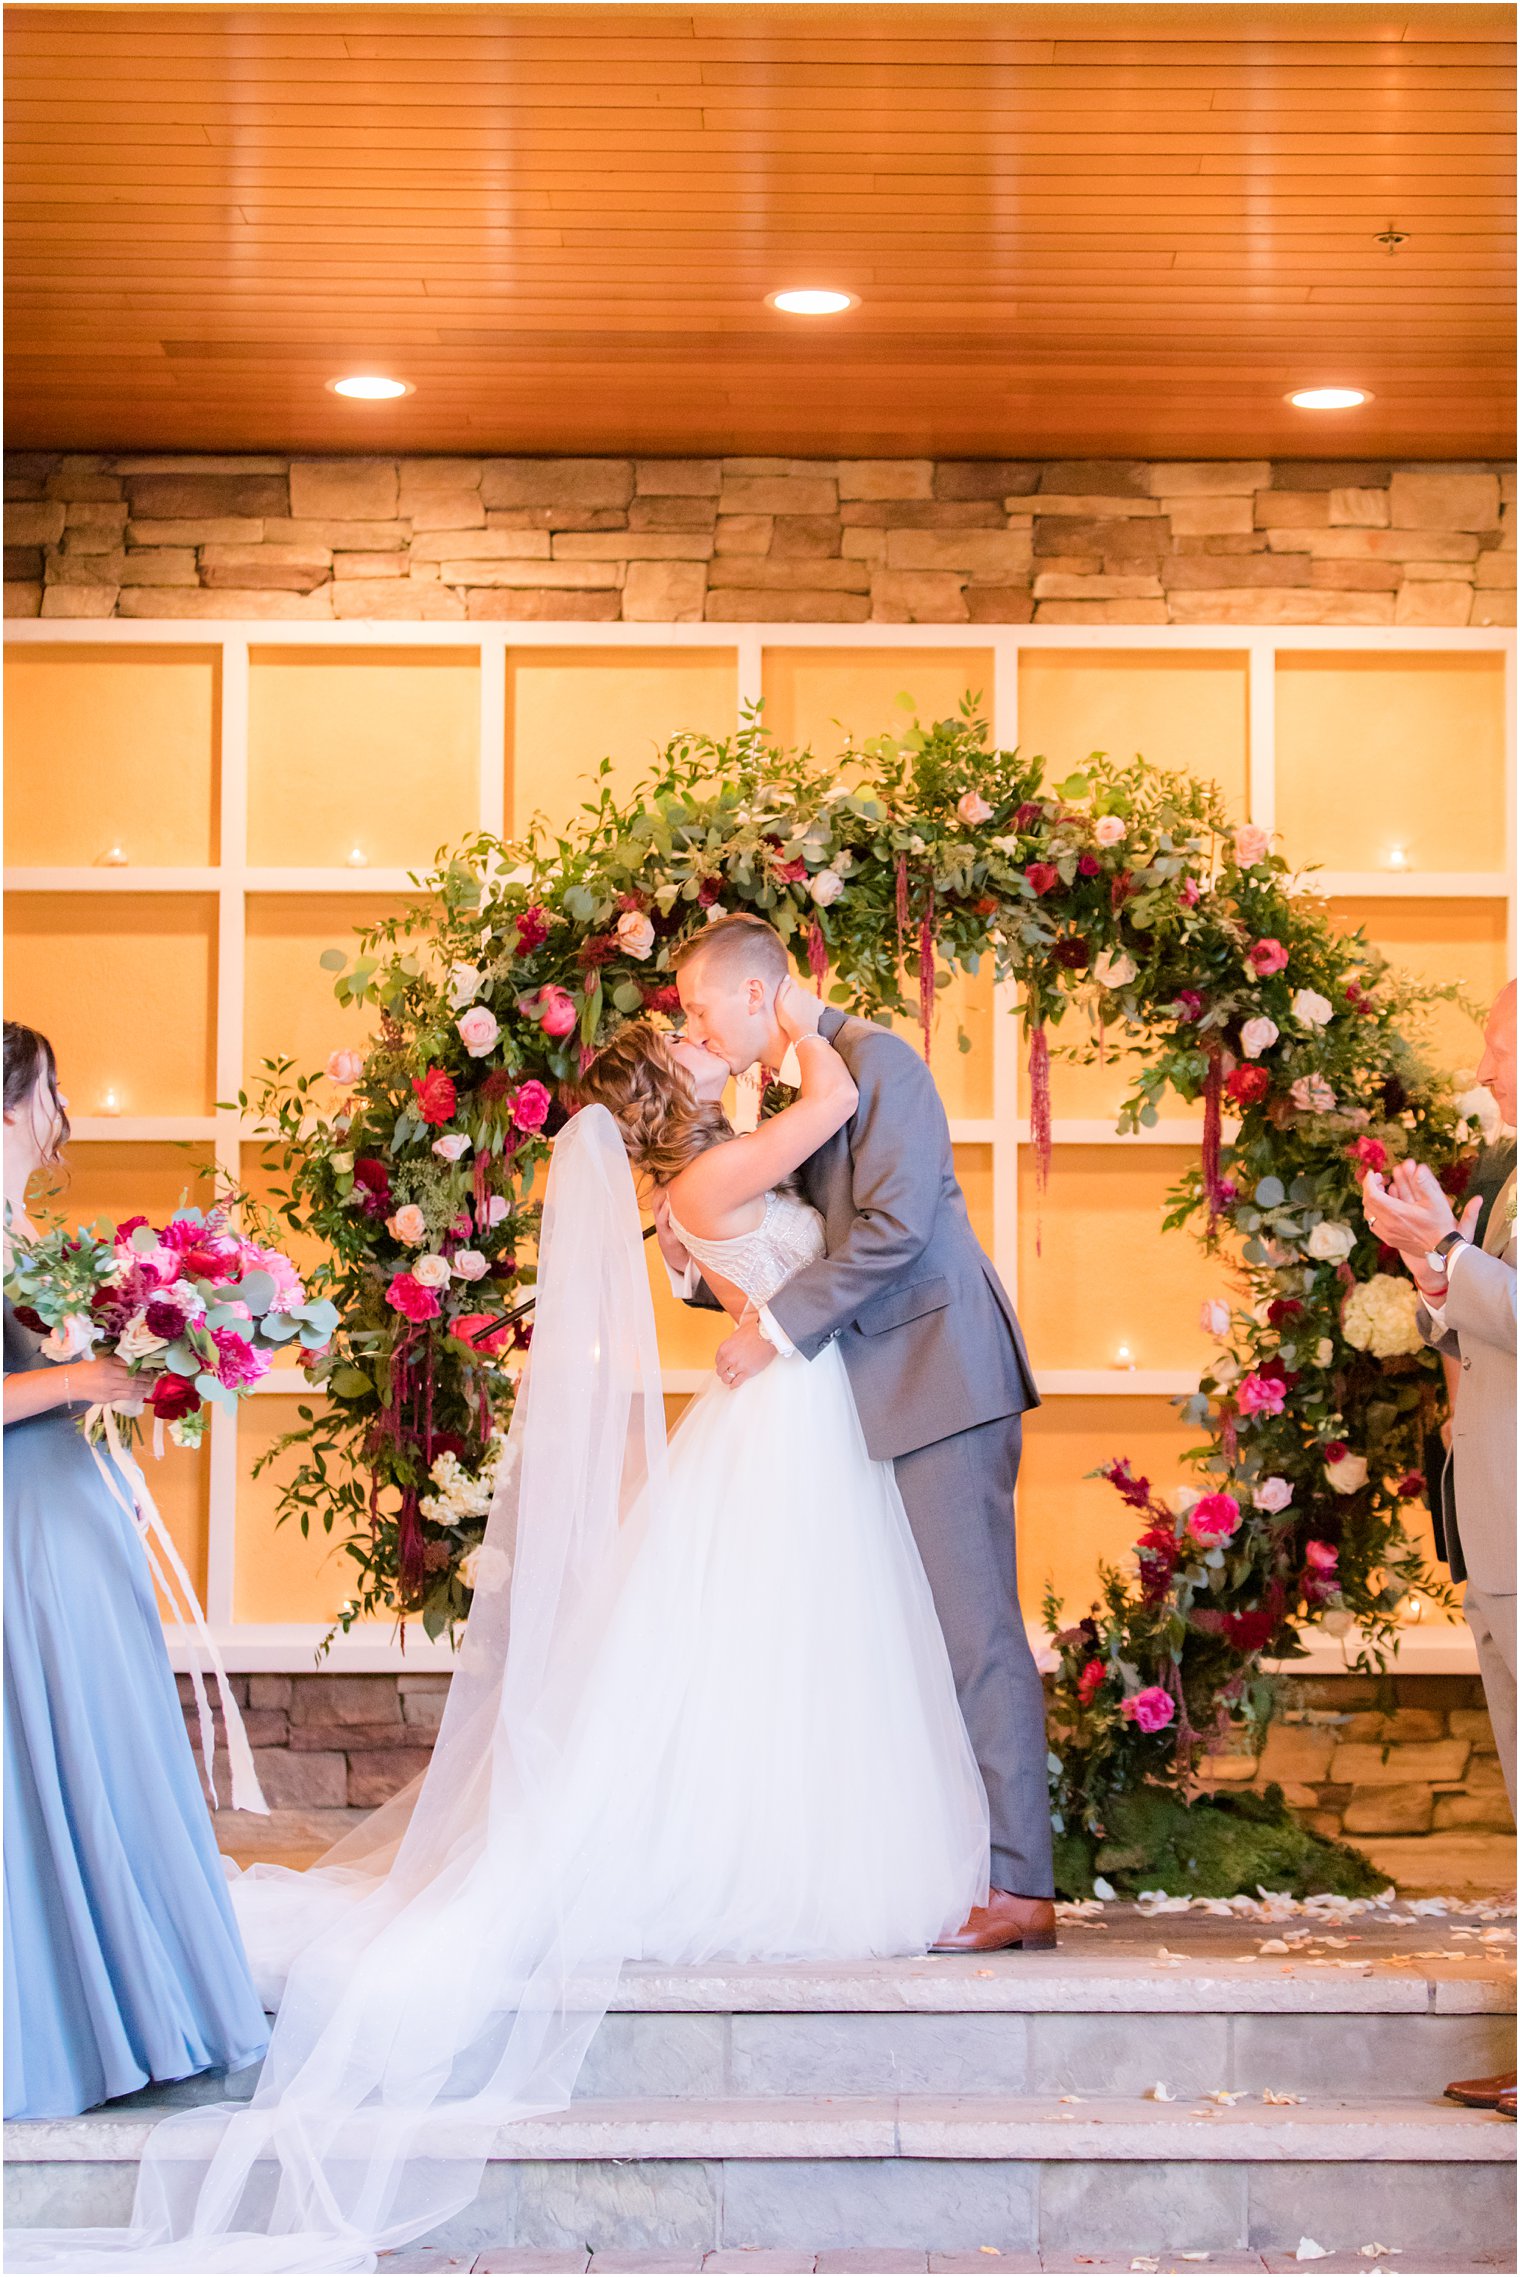 Idalia Photography photographs first kiss for bride and groom